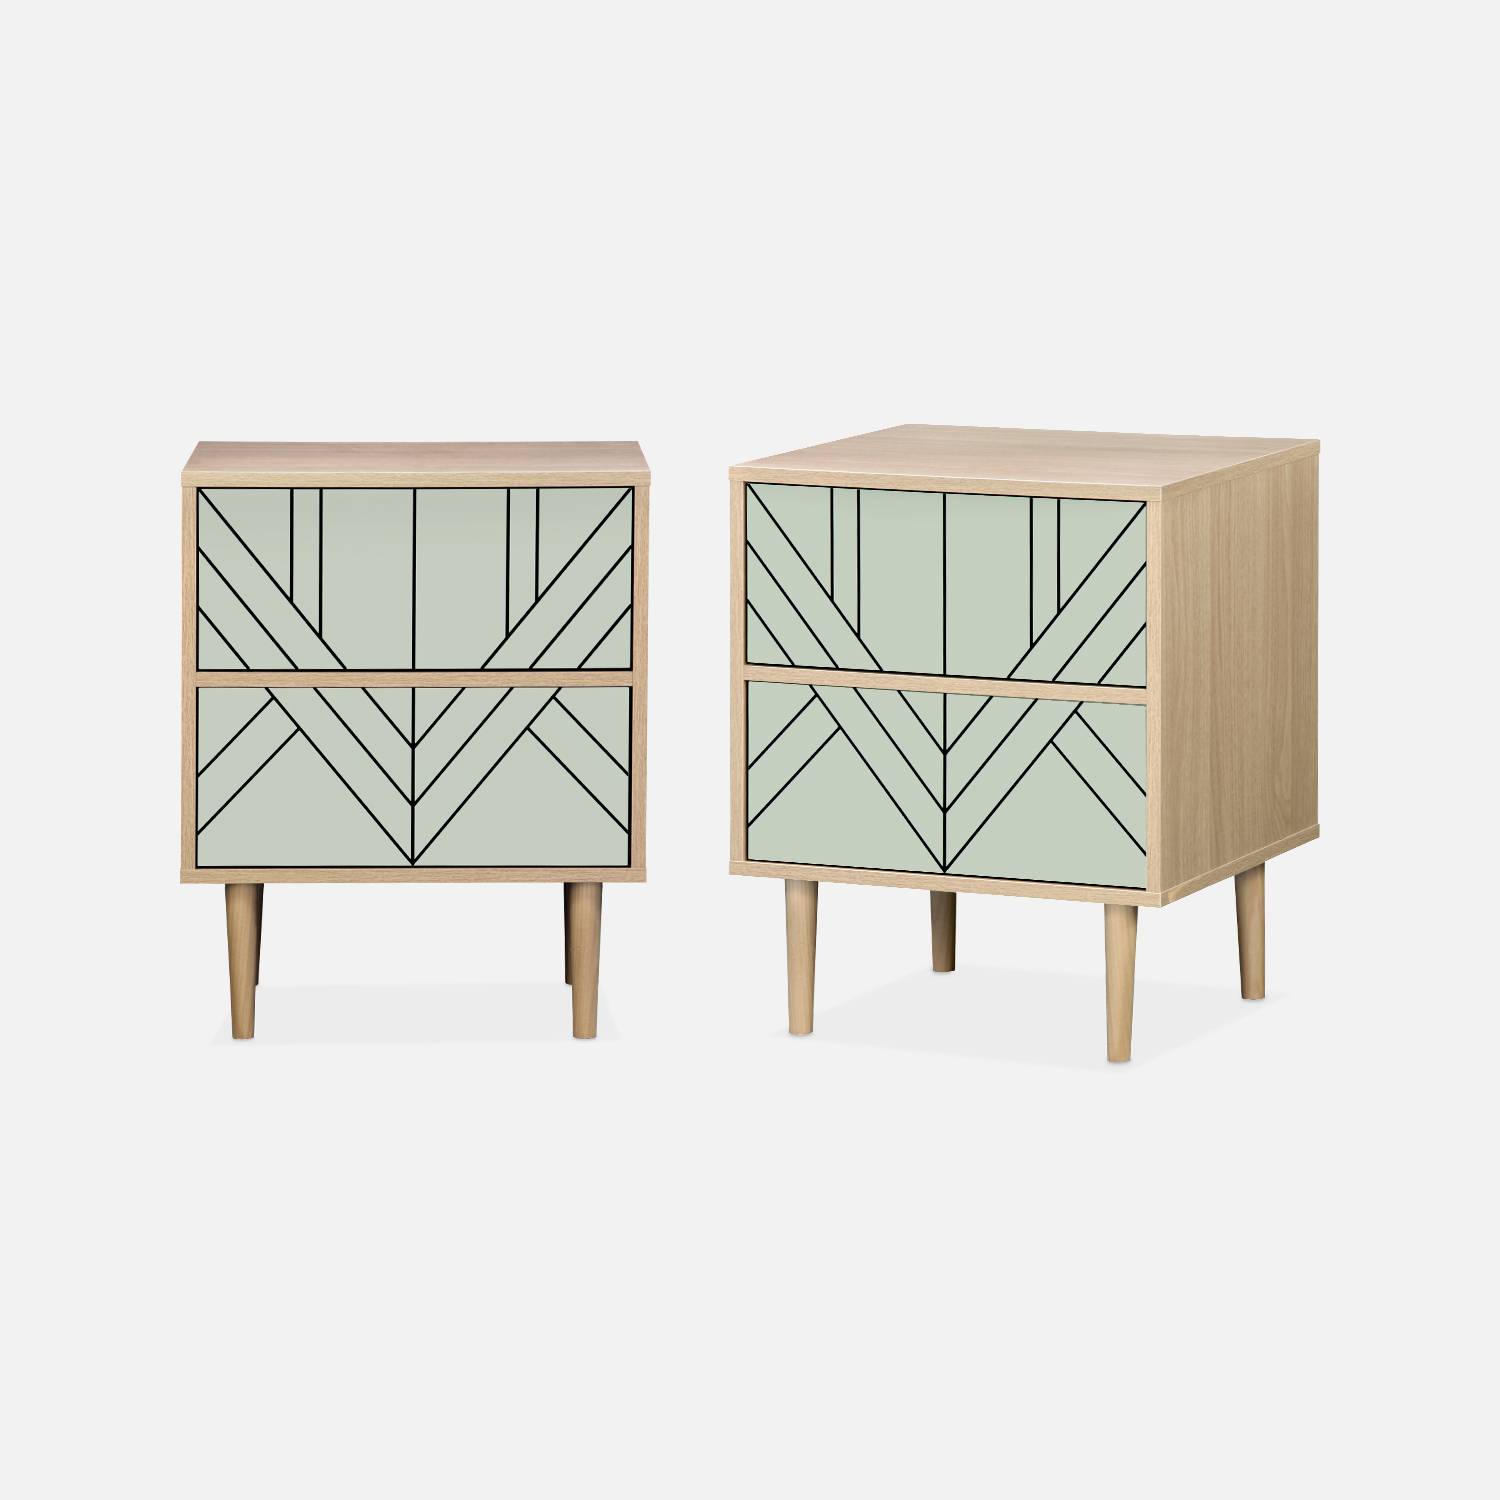 Pair of wood-effect bedside tables with two drawers, 48x40x59cm, Green | sweeek